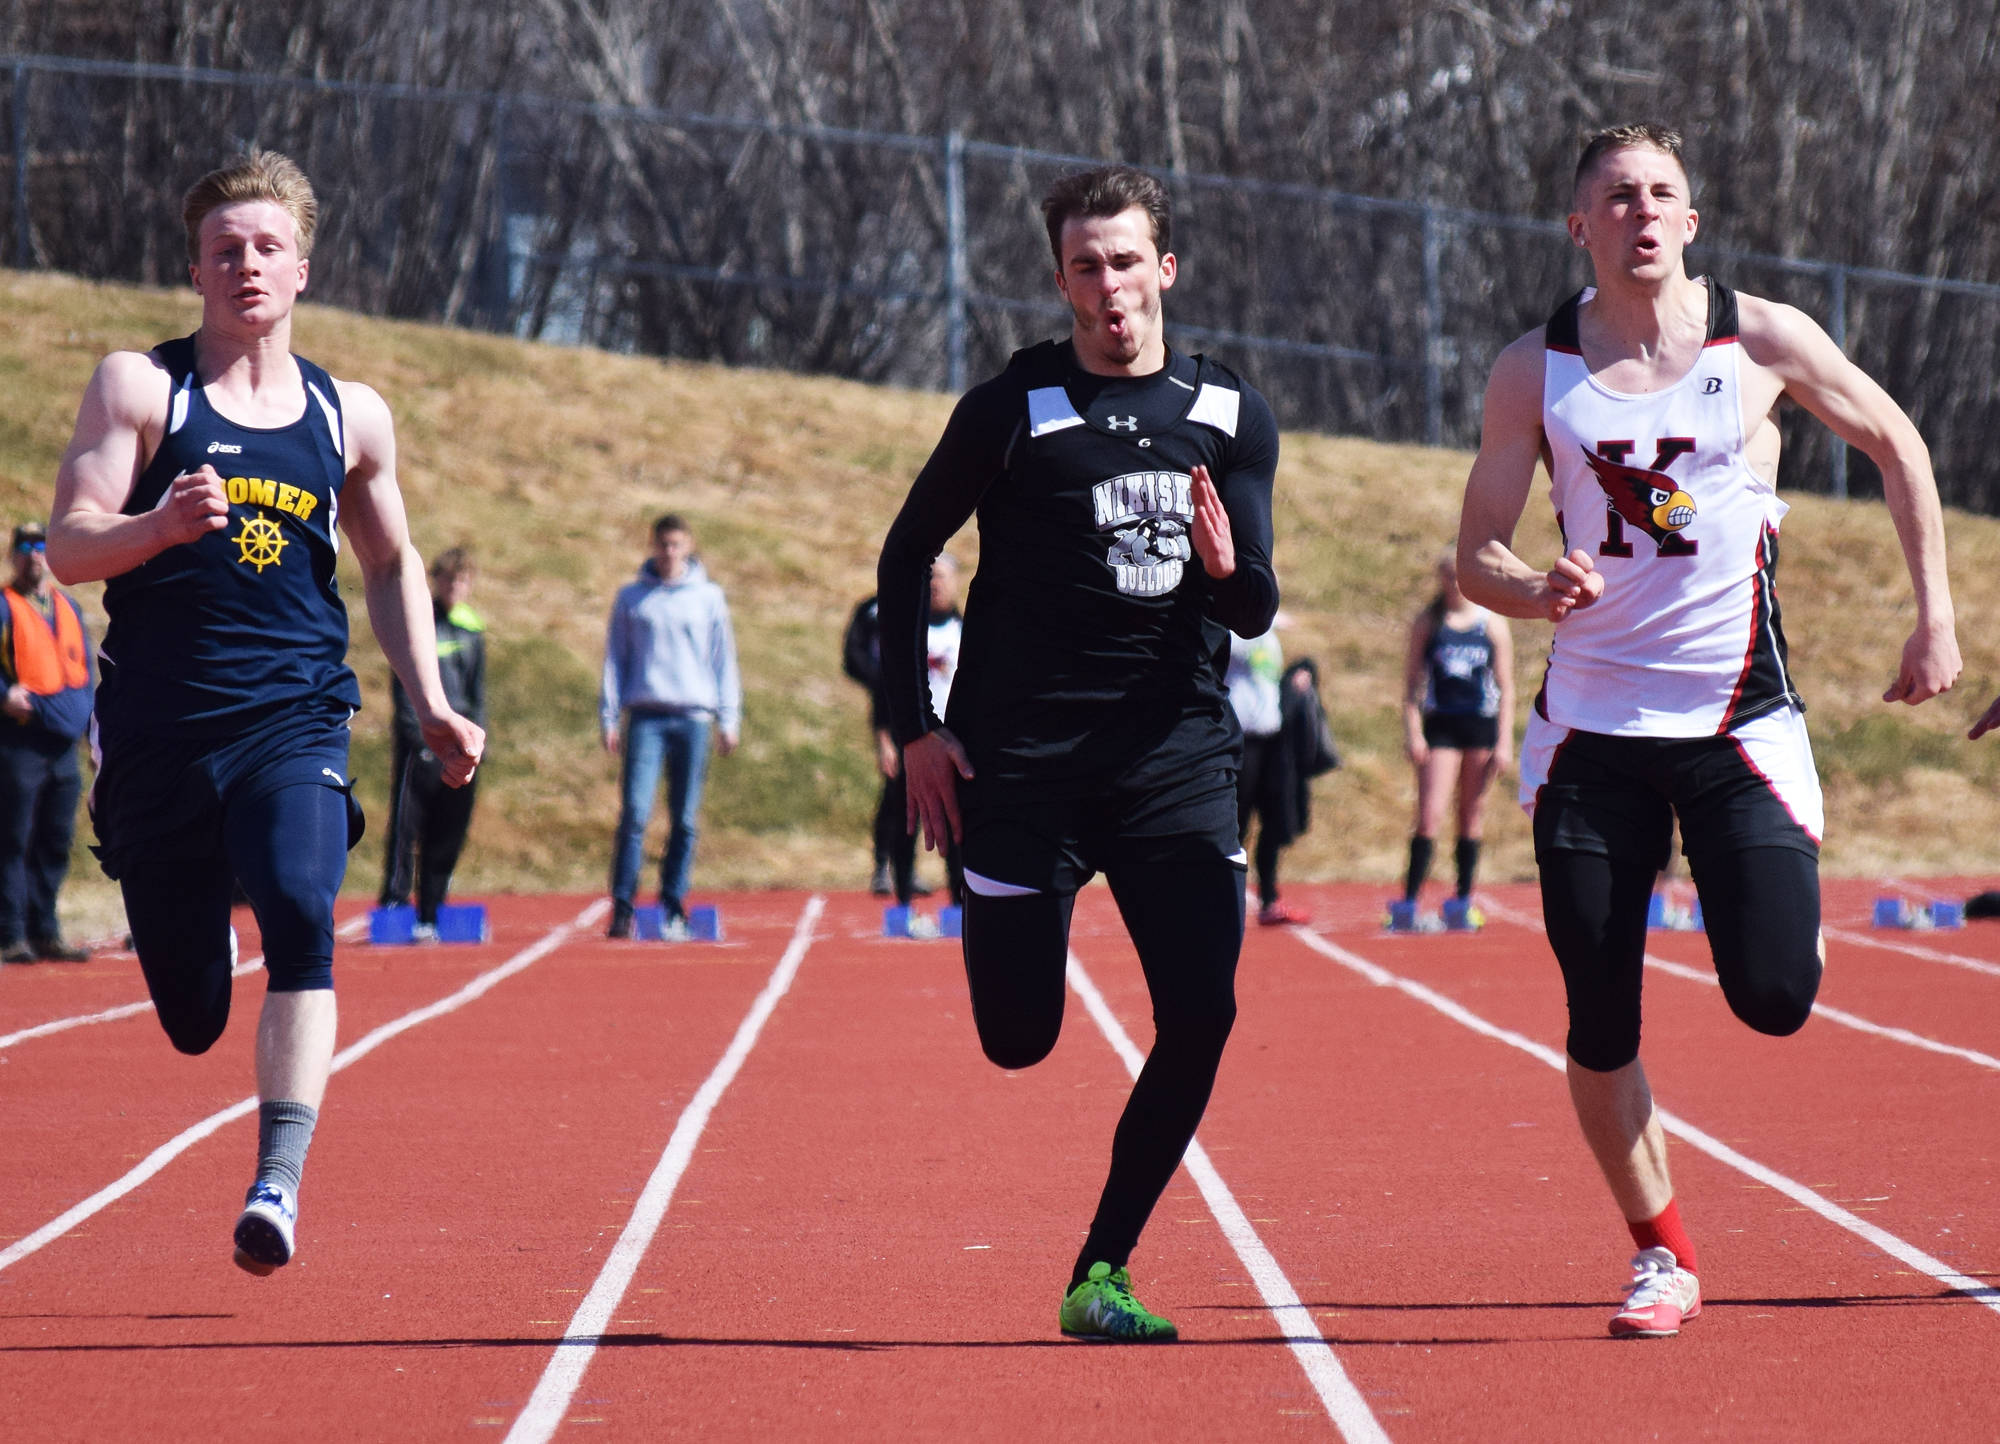 Nikiski junior Isaac Averill races to a victory in the boys 100-meter sprint alongside Teddy Croft of Homer (left) and Josh Jackman of Kenai Central (right) Saturday at the Homer Invite at Homer High School. (Photo by Joey Klecka/Peninsula Clarion)